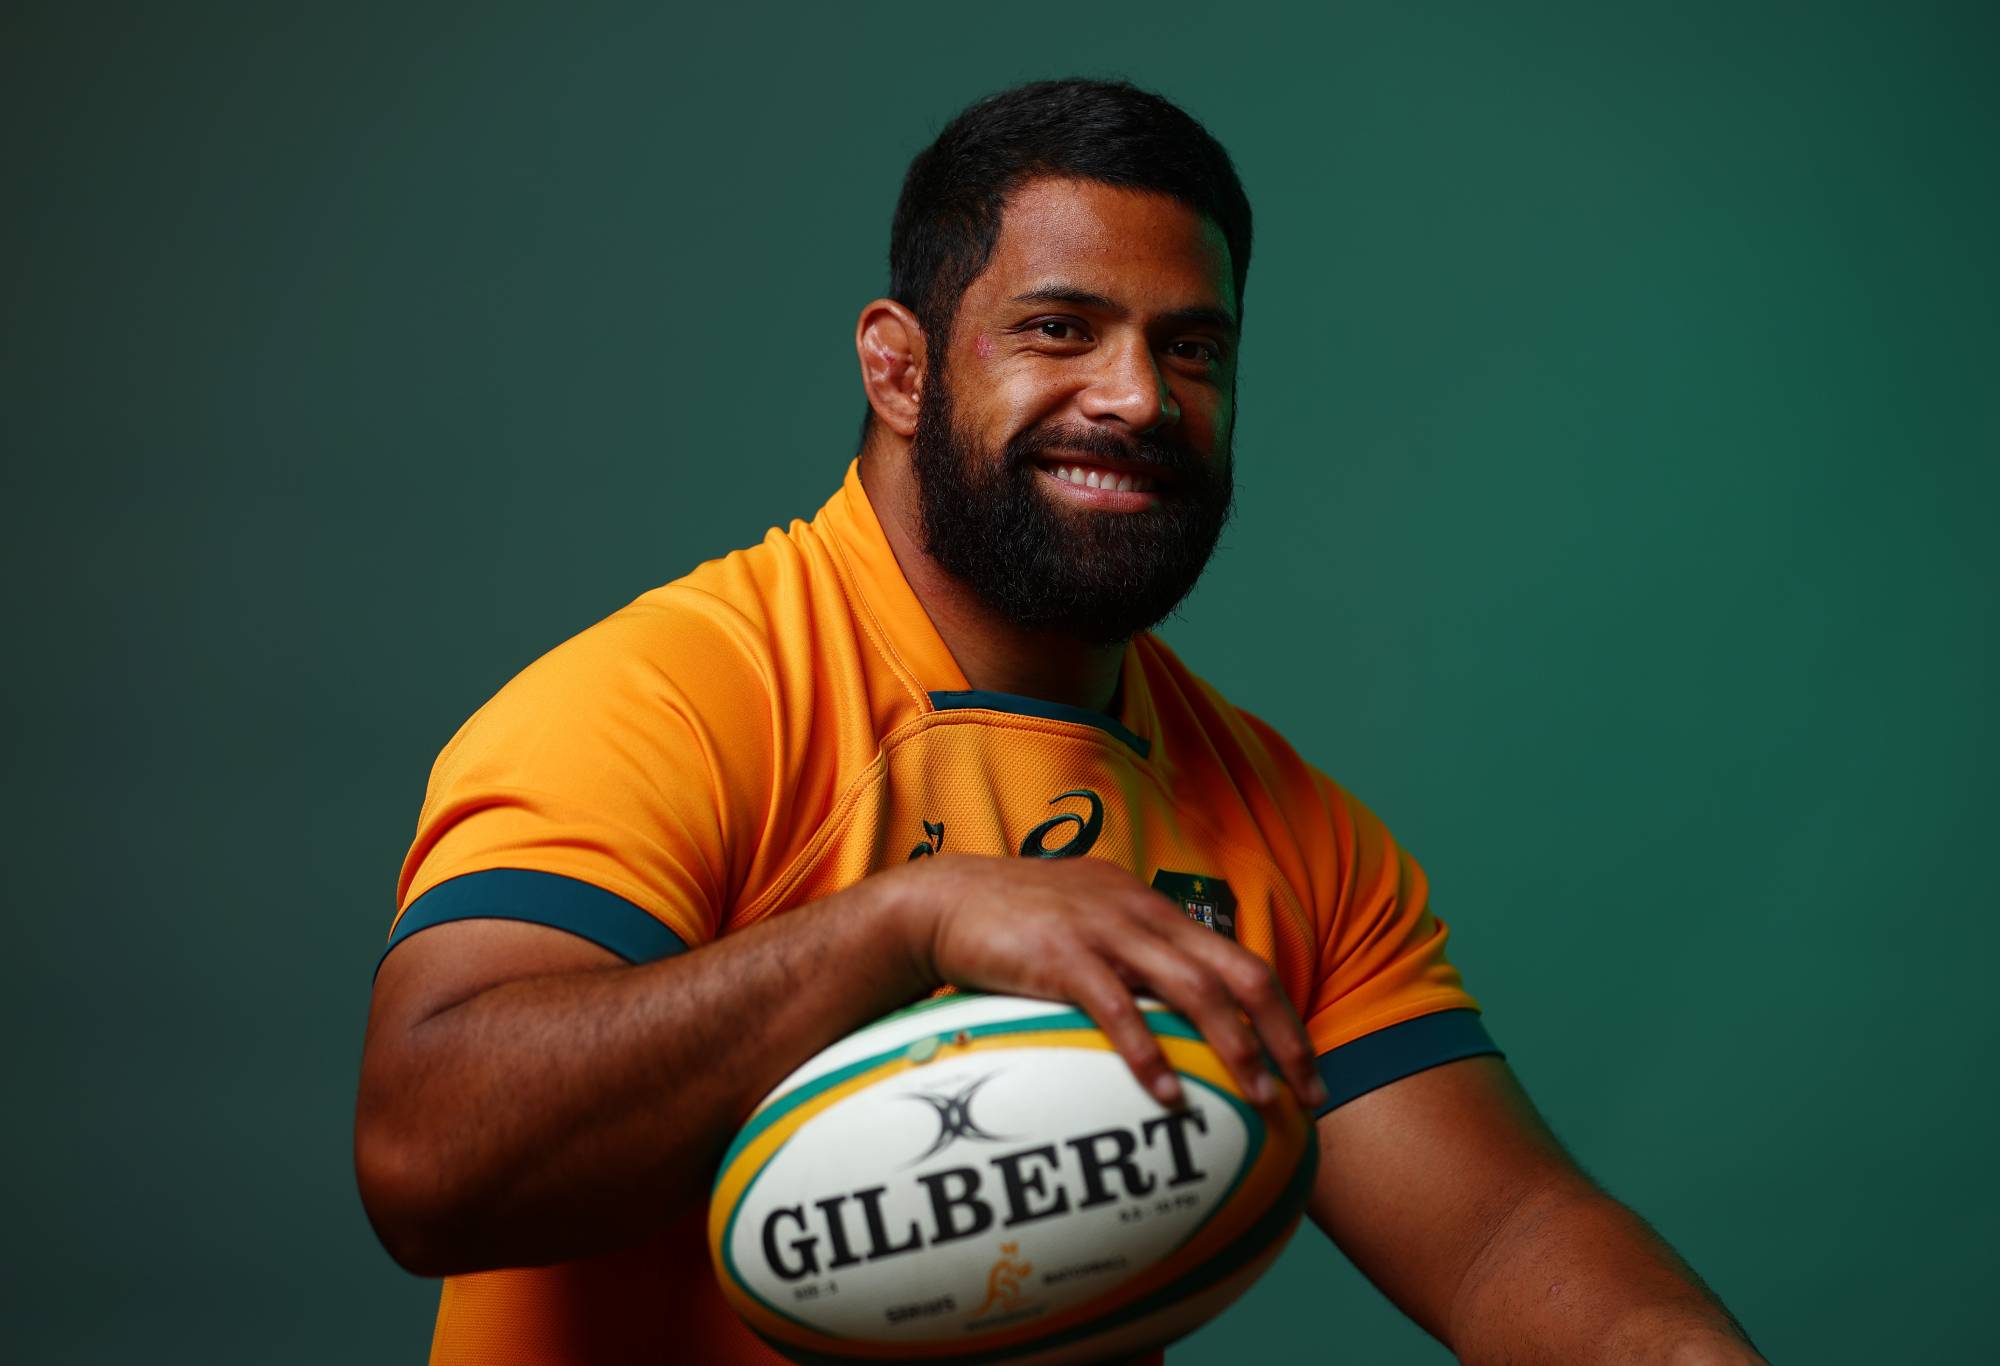 Scott Sio poses during the Australian Wallabies 2022 team headshots session on June 24, 2022 in Sunshine Coast, Australia. (Photo by Chris Hyde/Getty Images for Rugby Australia)